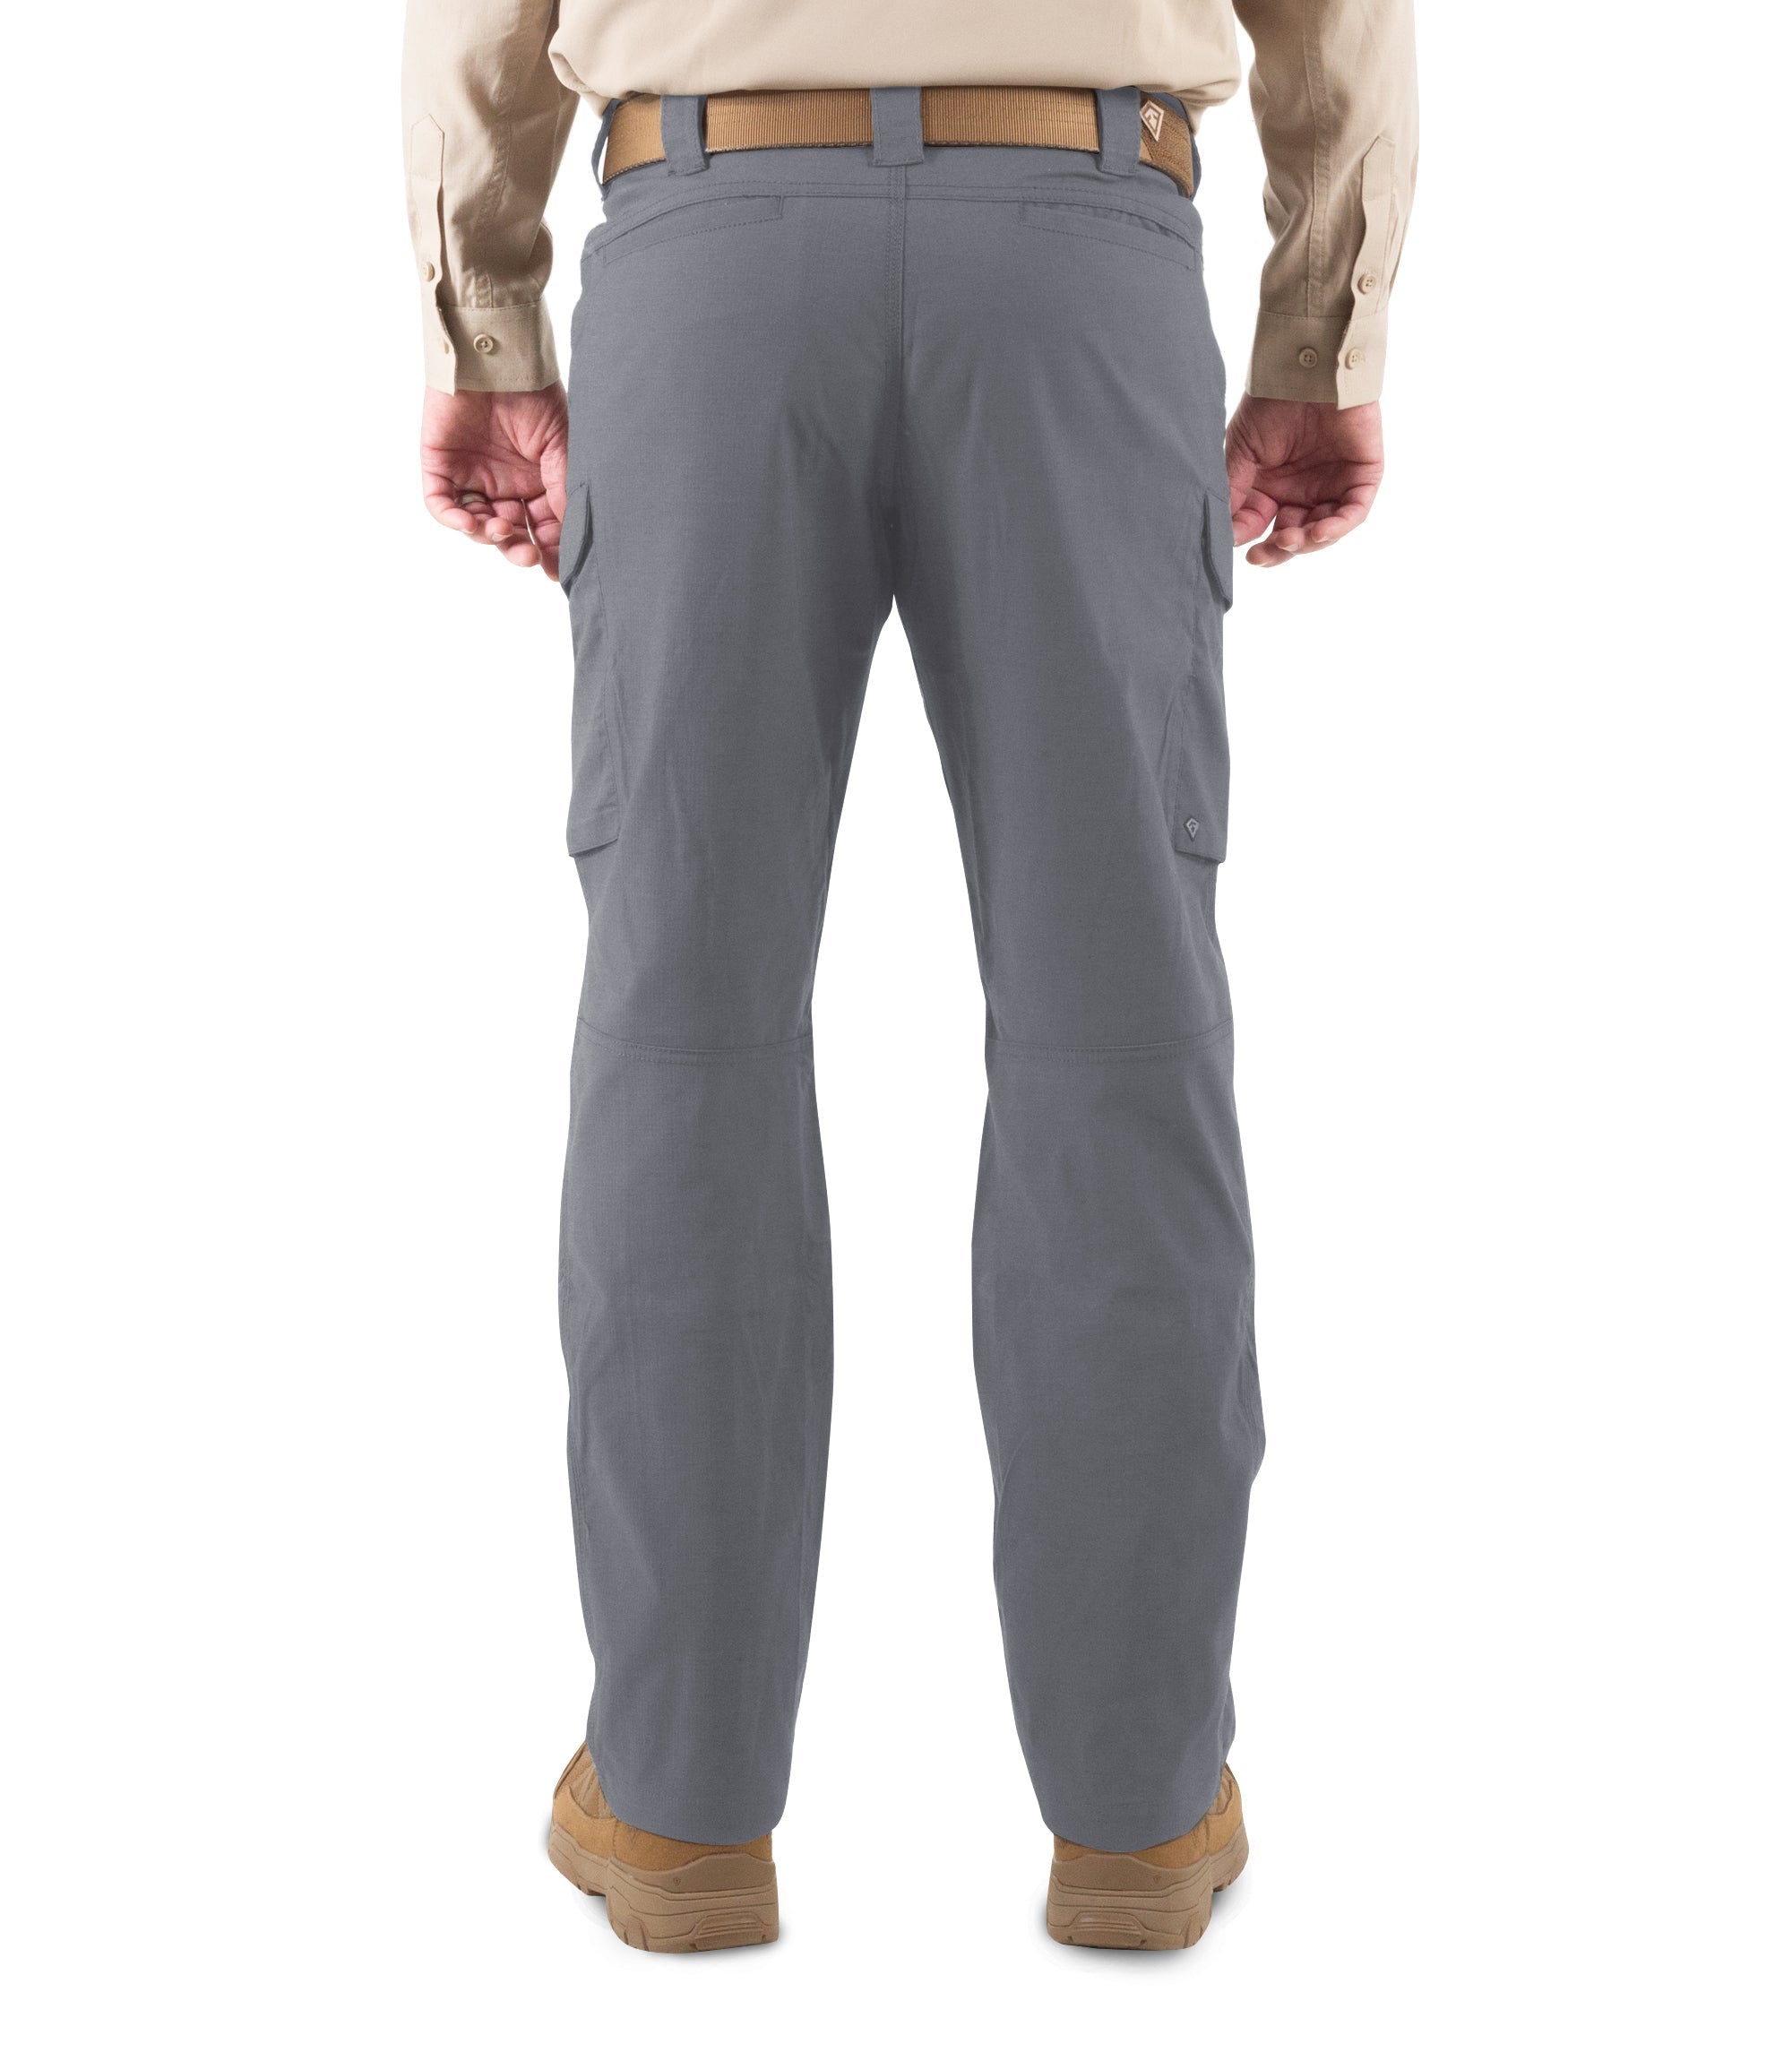 First Tactical - MEN'S V2 TACTICAL PANT - WOLF GREY